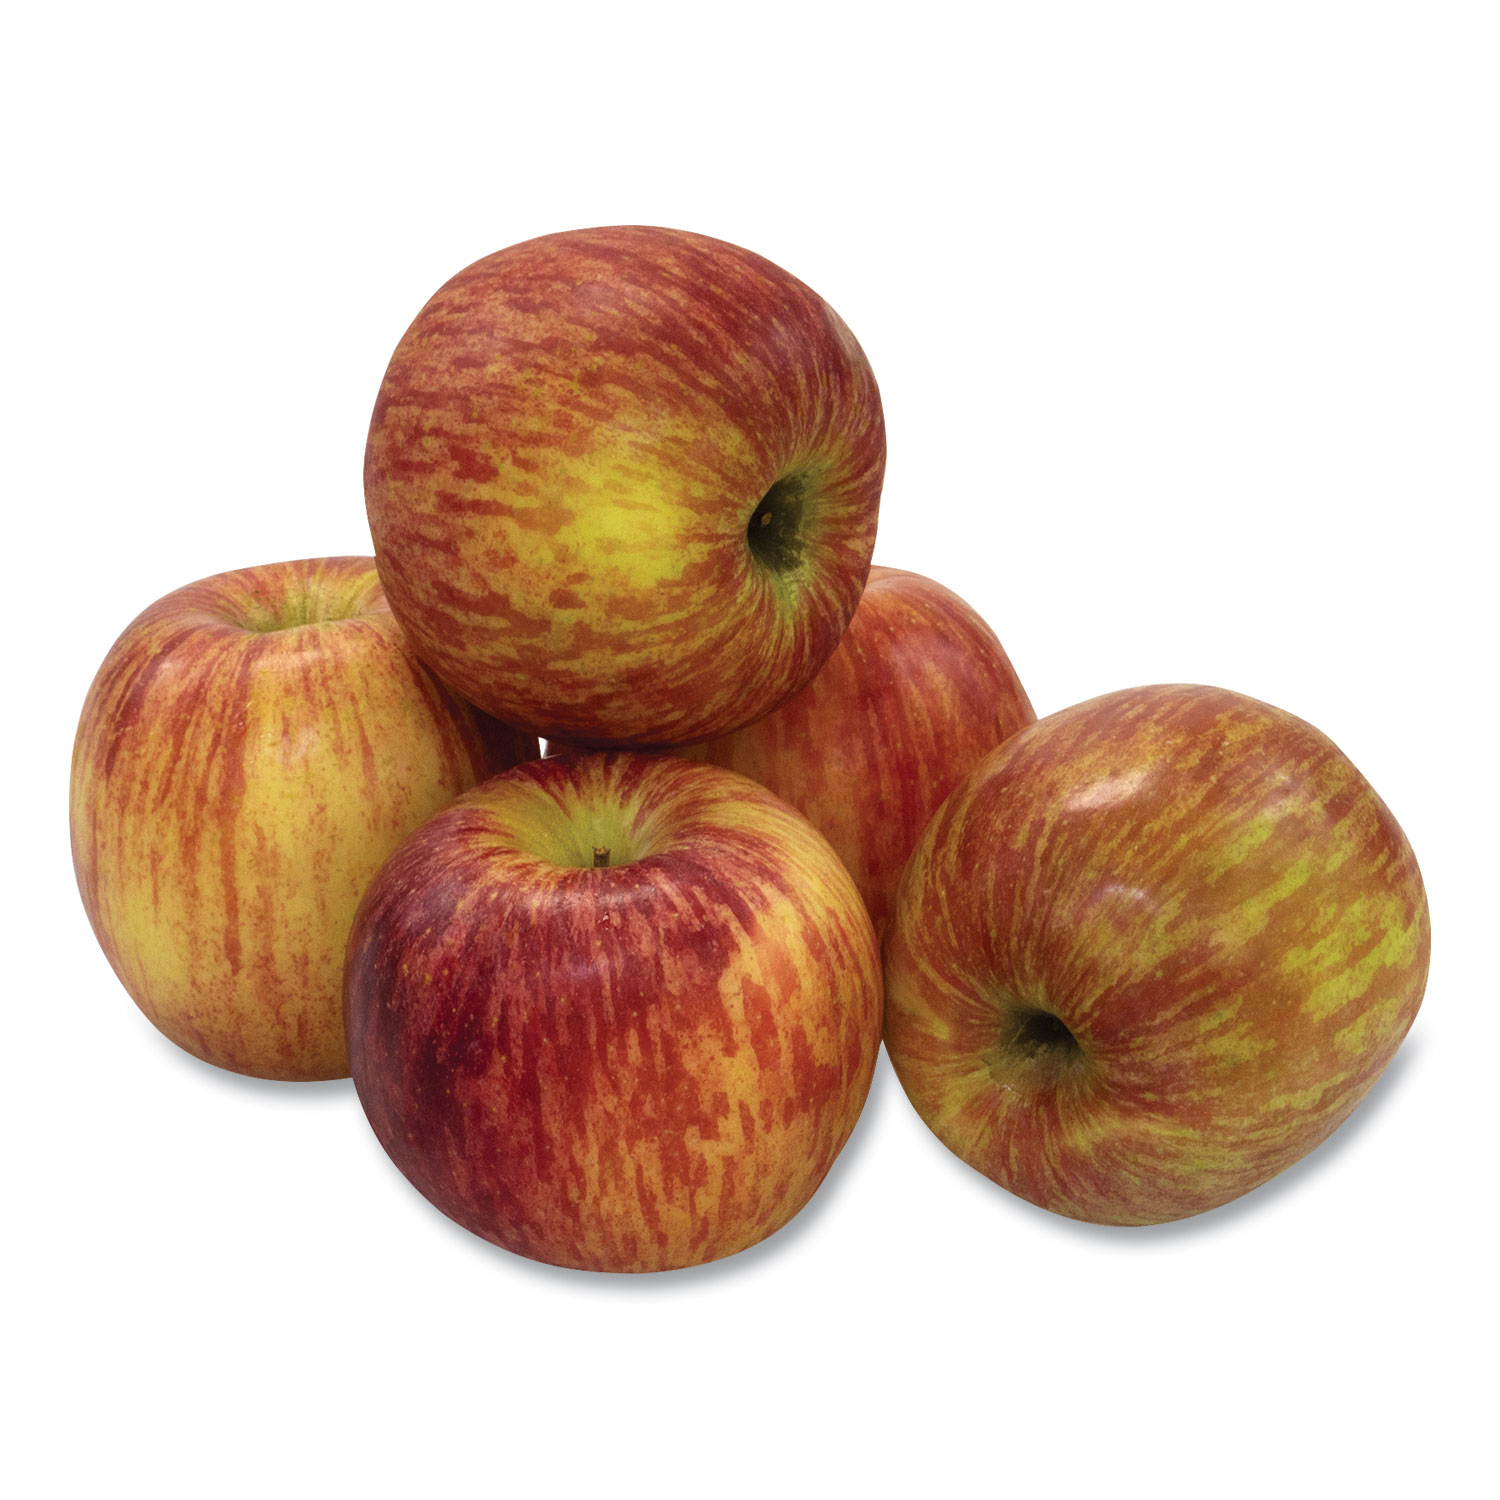  National Brand 2453 Fresh Fuji Apples, 8/Pack, Free Delivery in 1-4 Business Days (GRR90000040) 